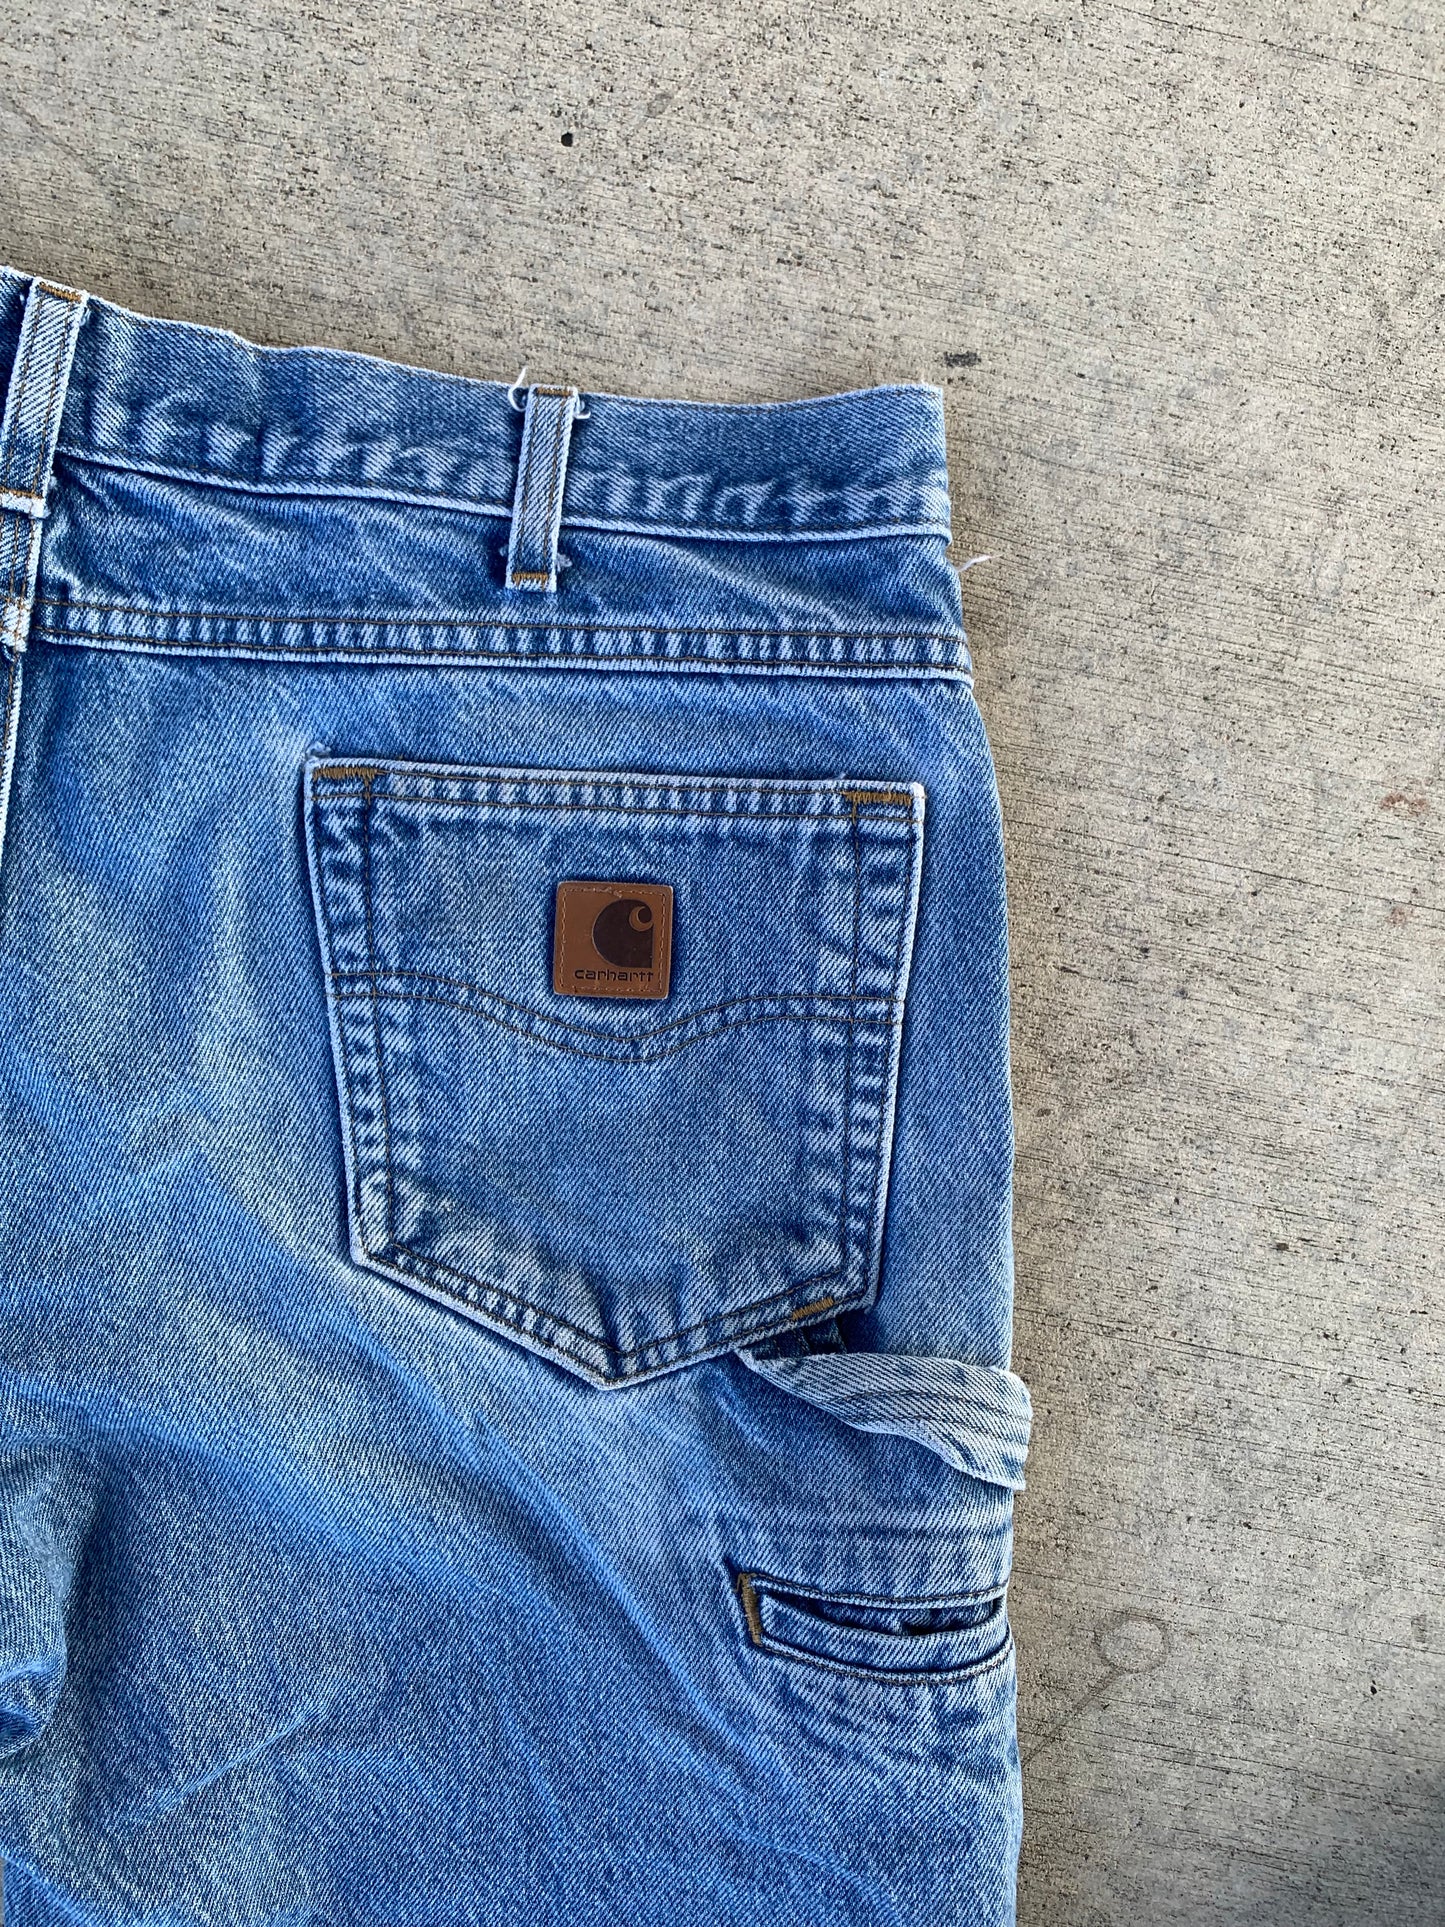 Medium Wash Carhartt Jeans with side straps